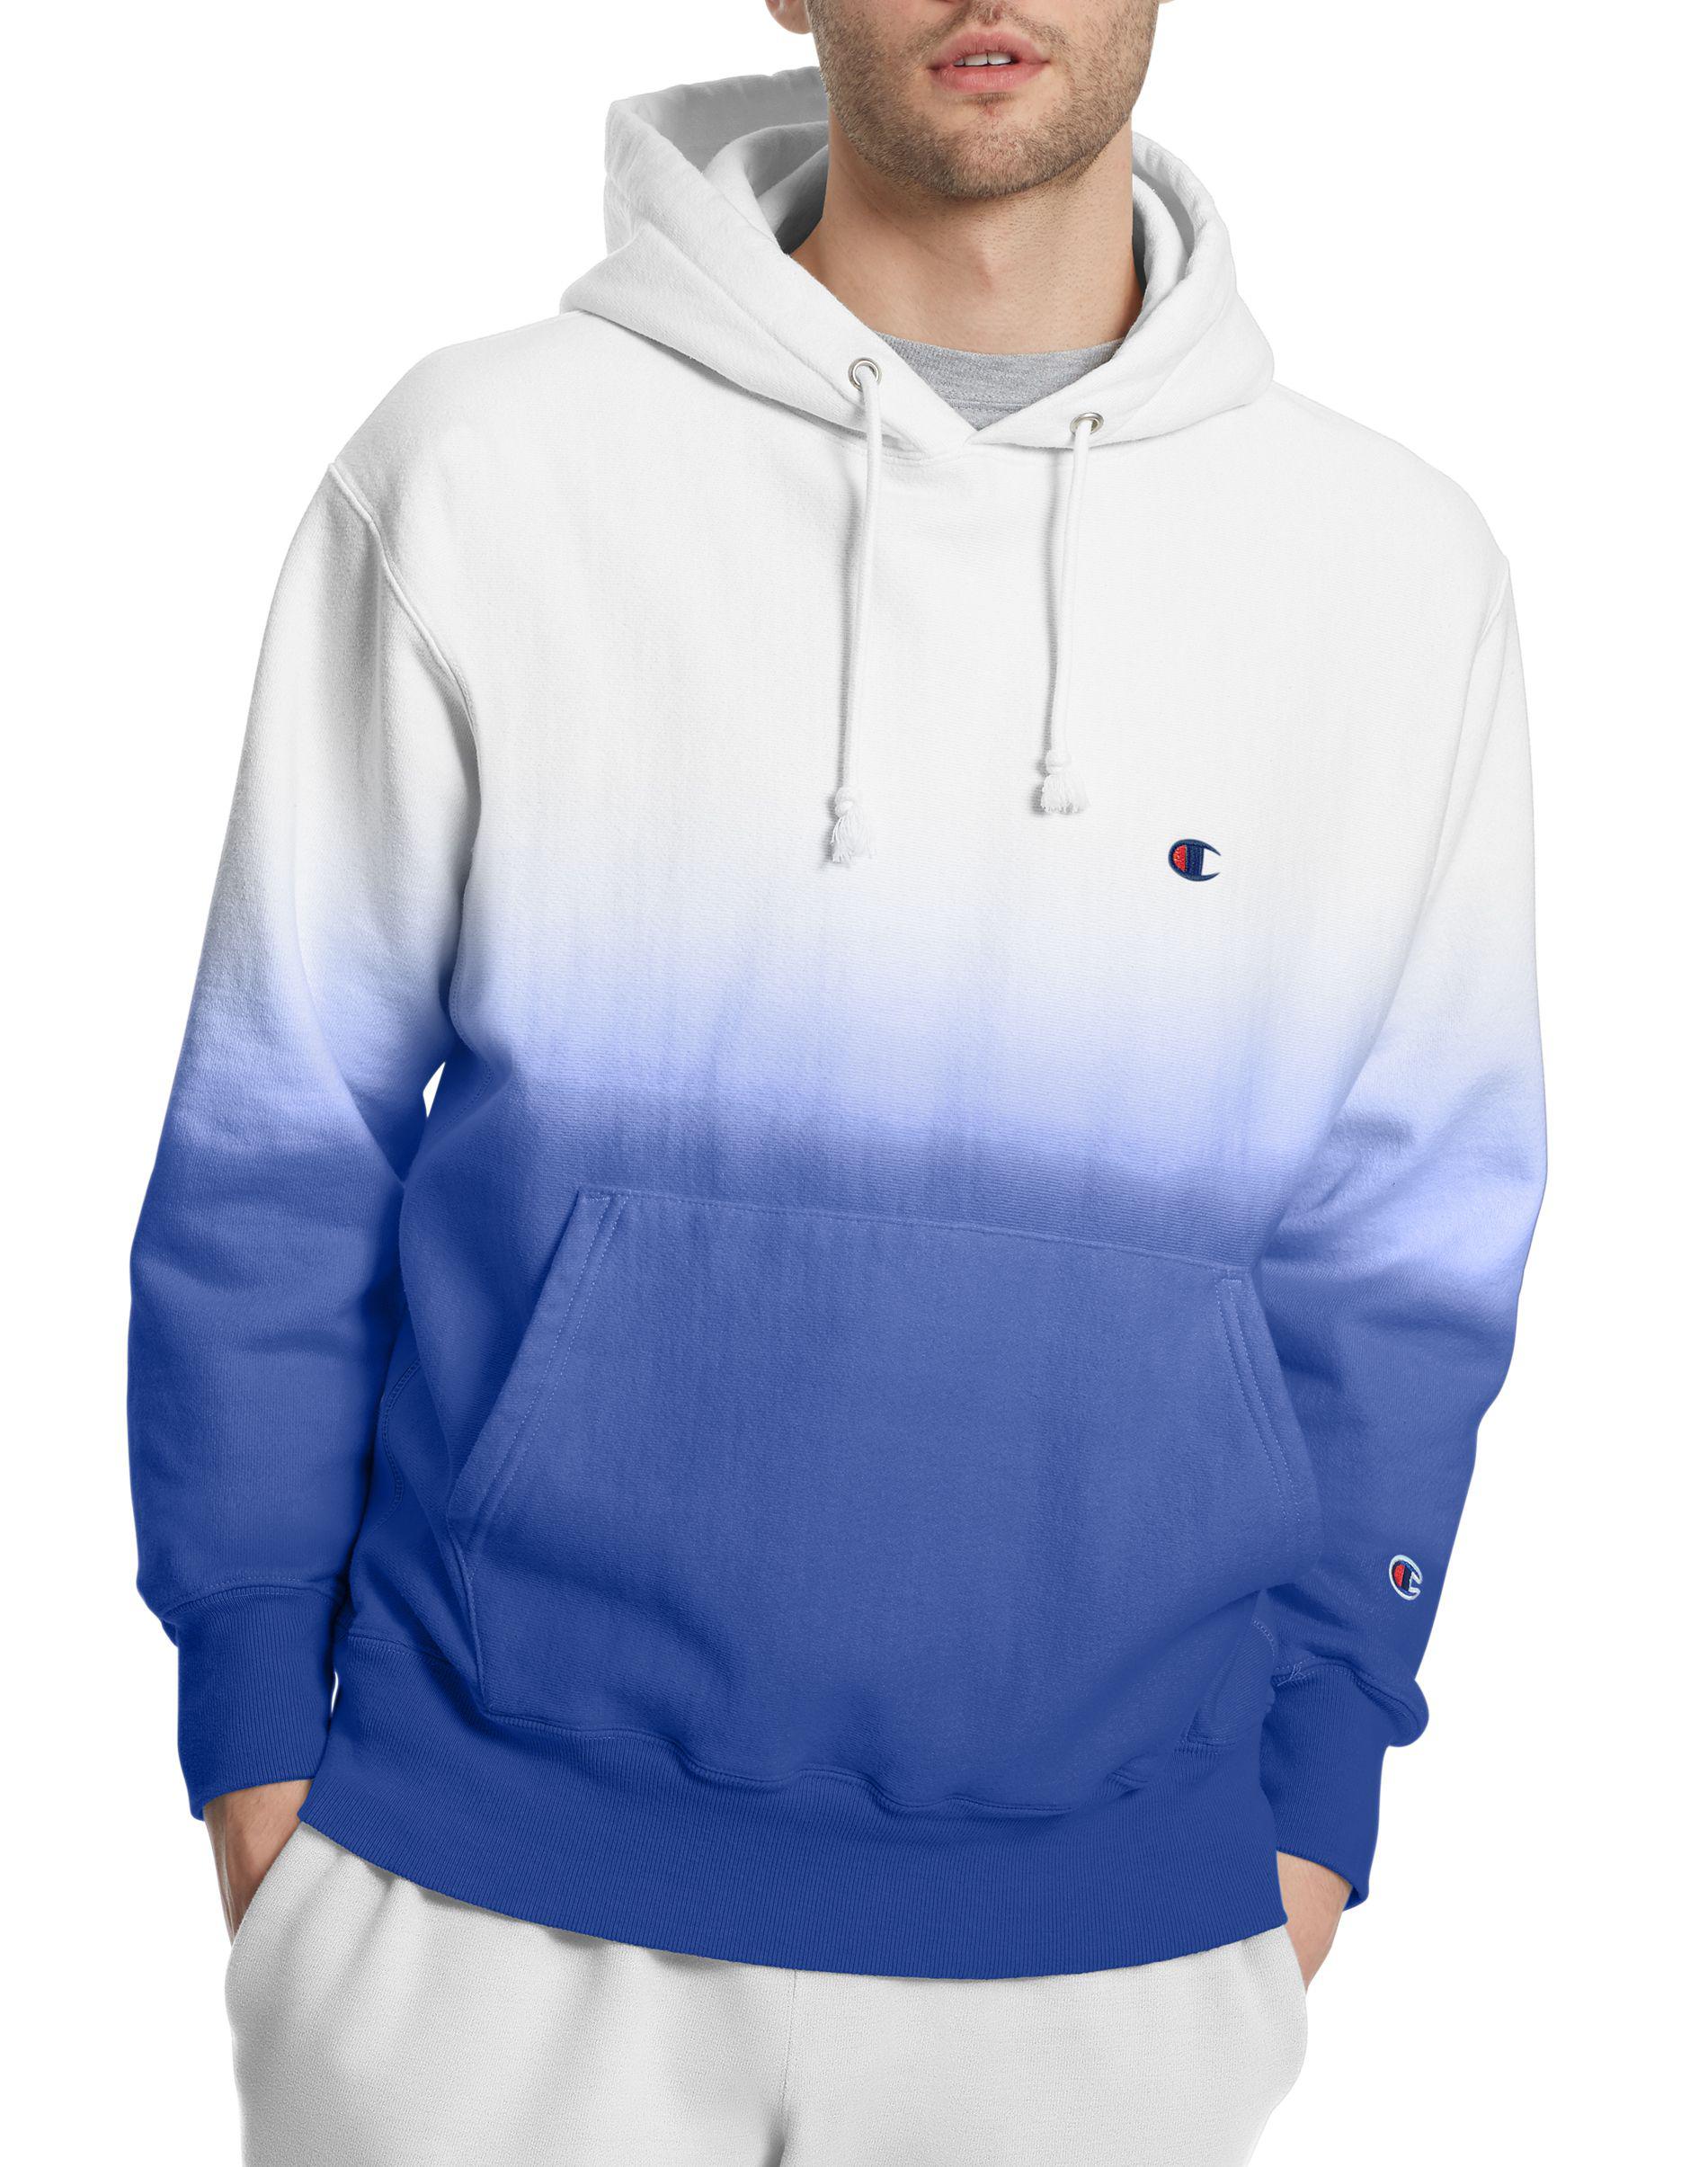 ombre champion hoodie off 60% - www 